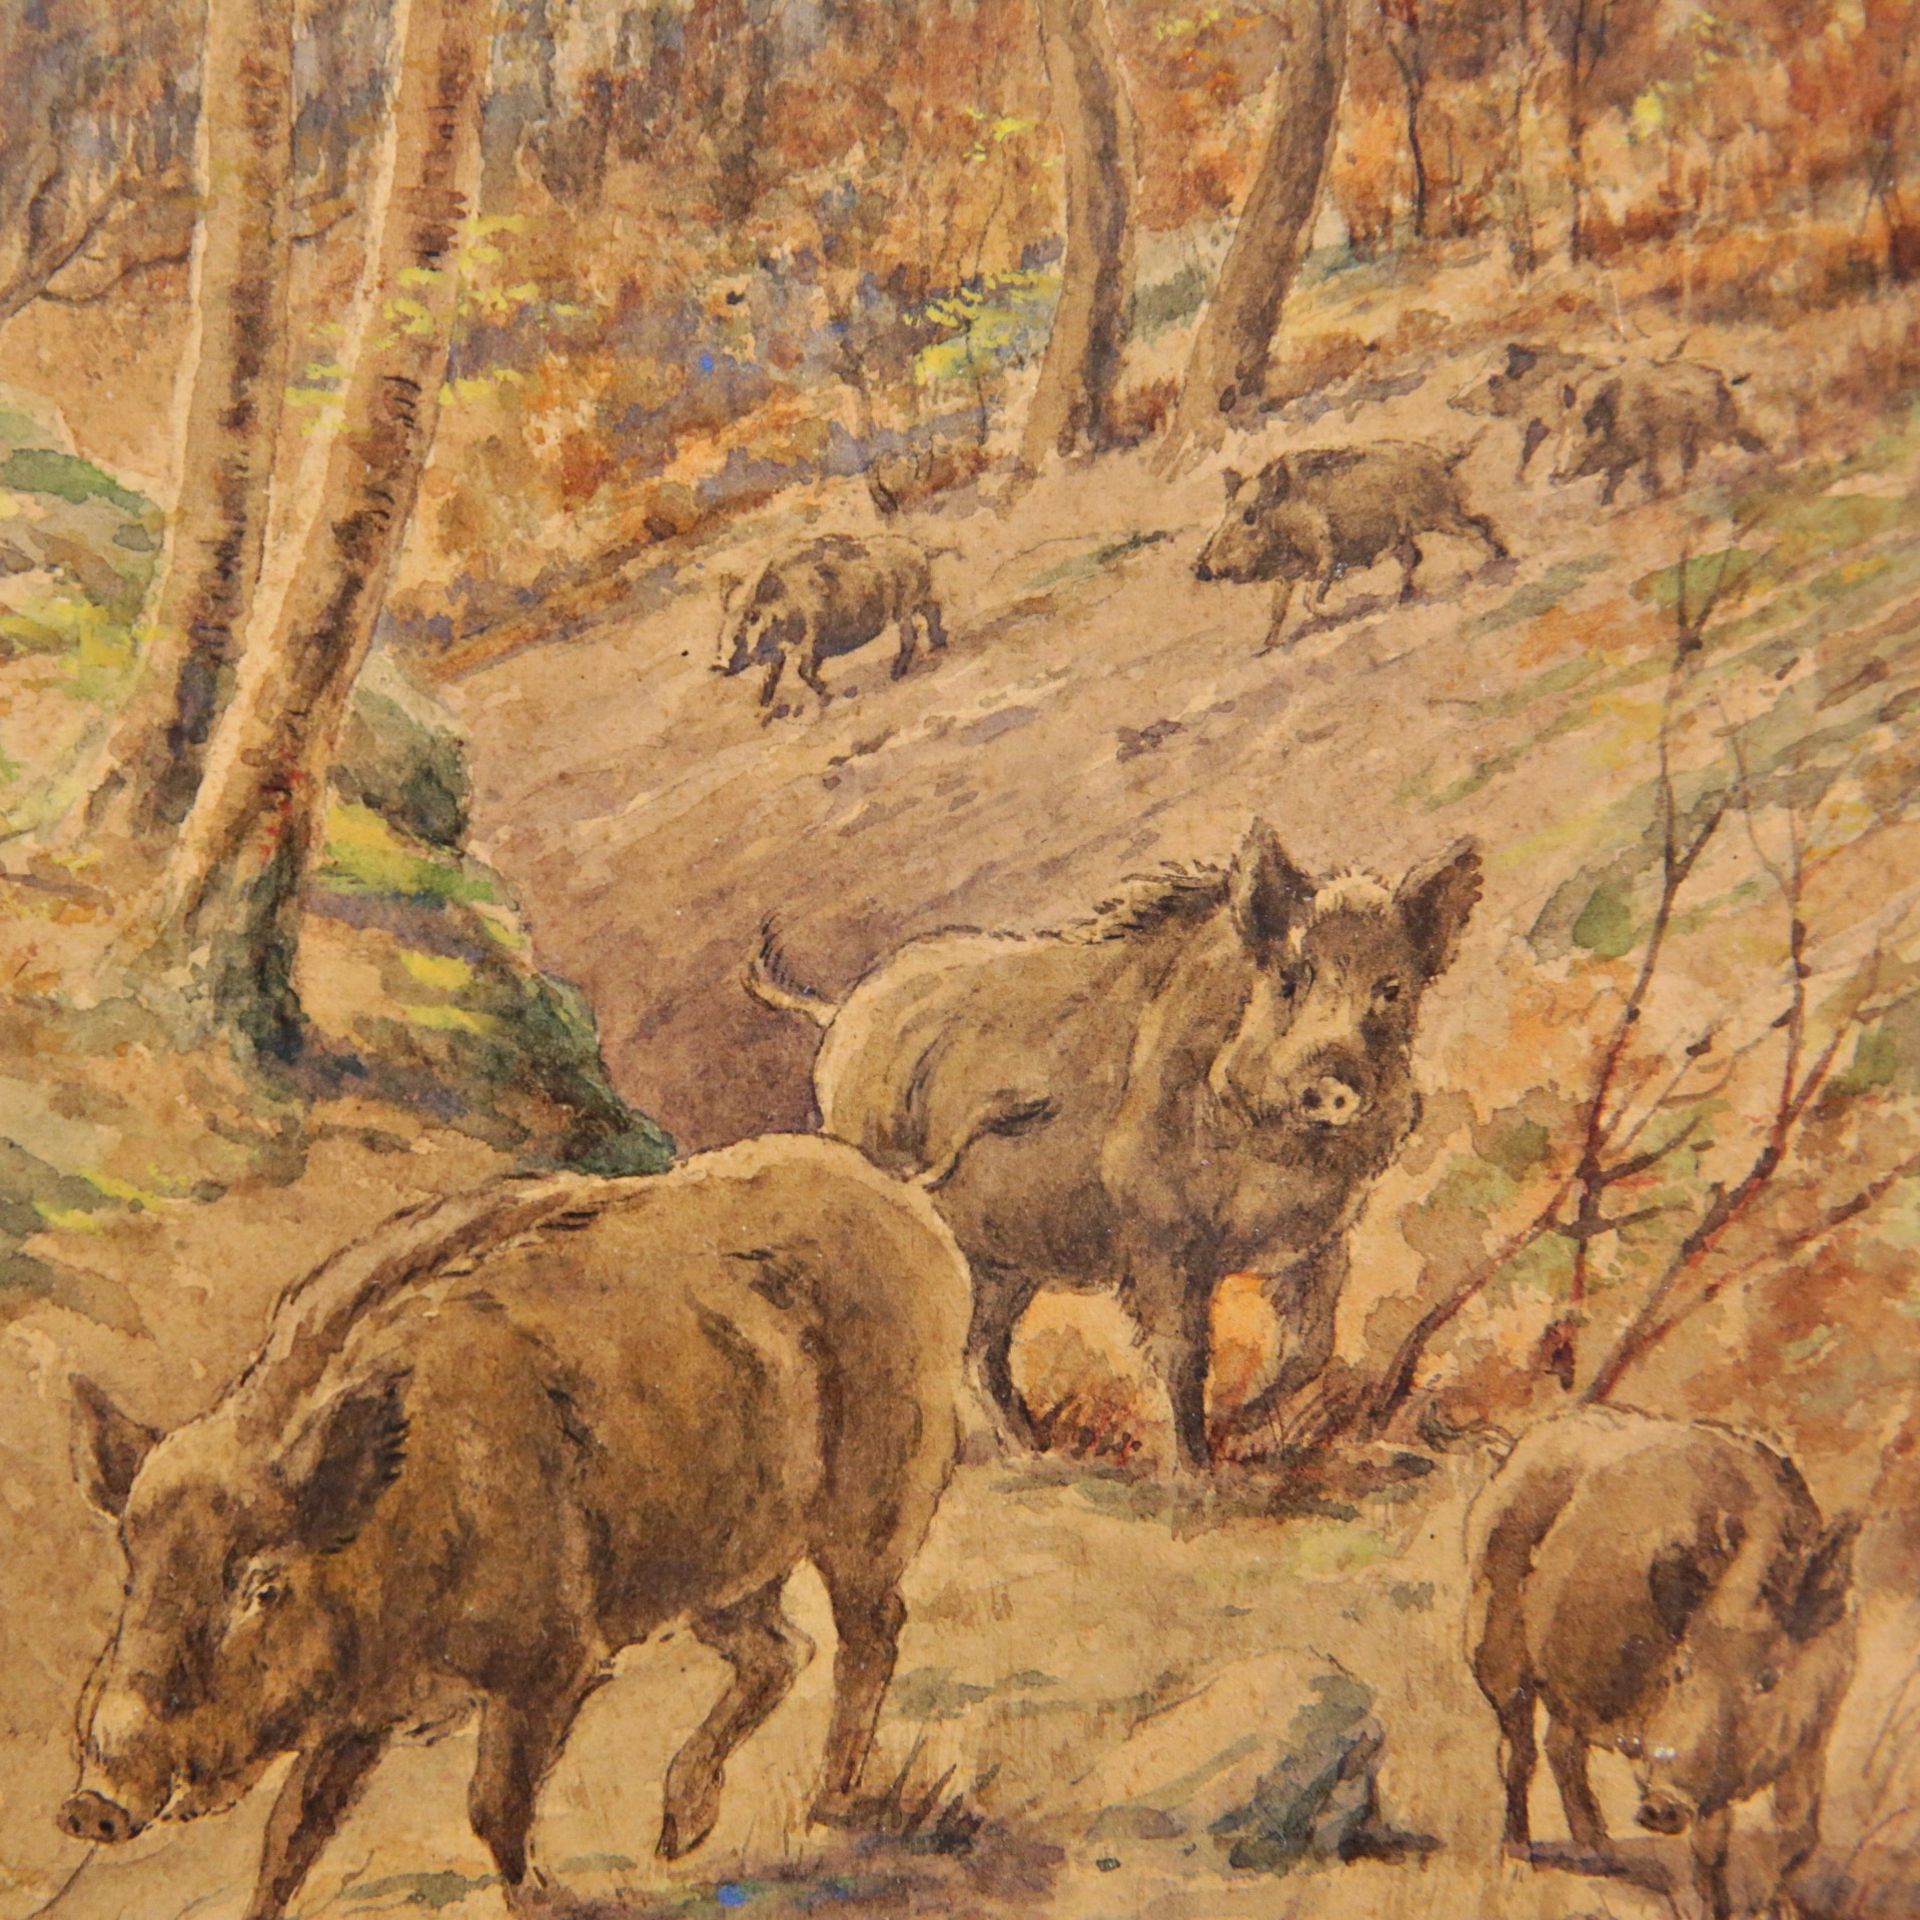 Paul COLAS (1902-?) "The wild boars" watercolor on paper, French painting of the 20th century. - Bild 3 aus 4